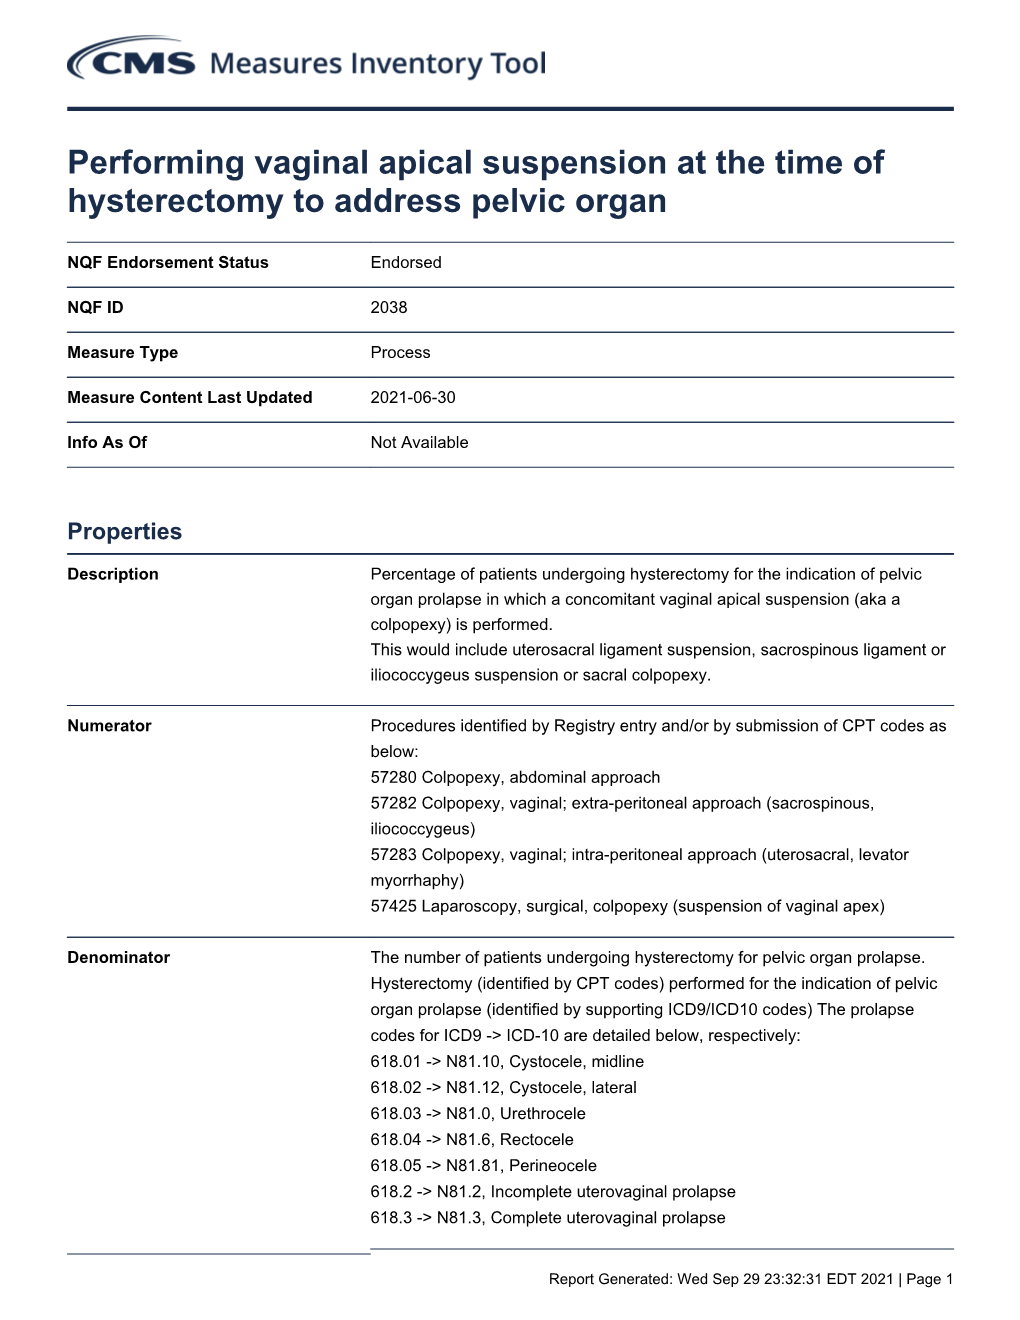 Performing Vaginal Apical Suspension at the Time of Hysterectomy to Address Pelvic Organ